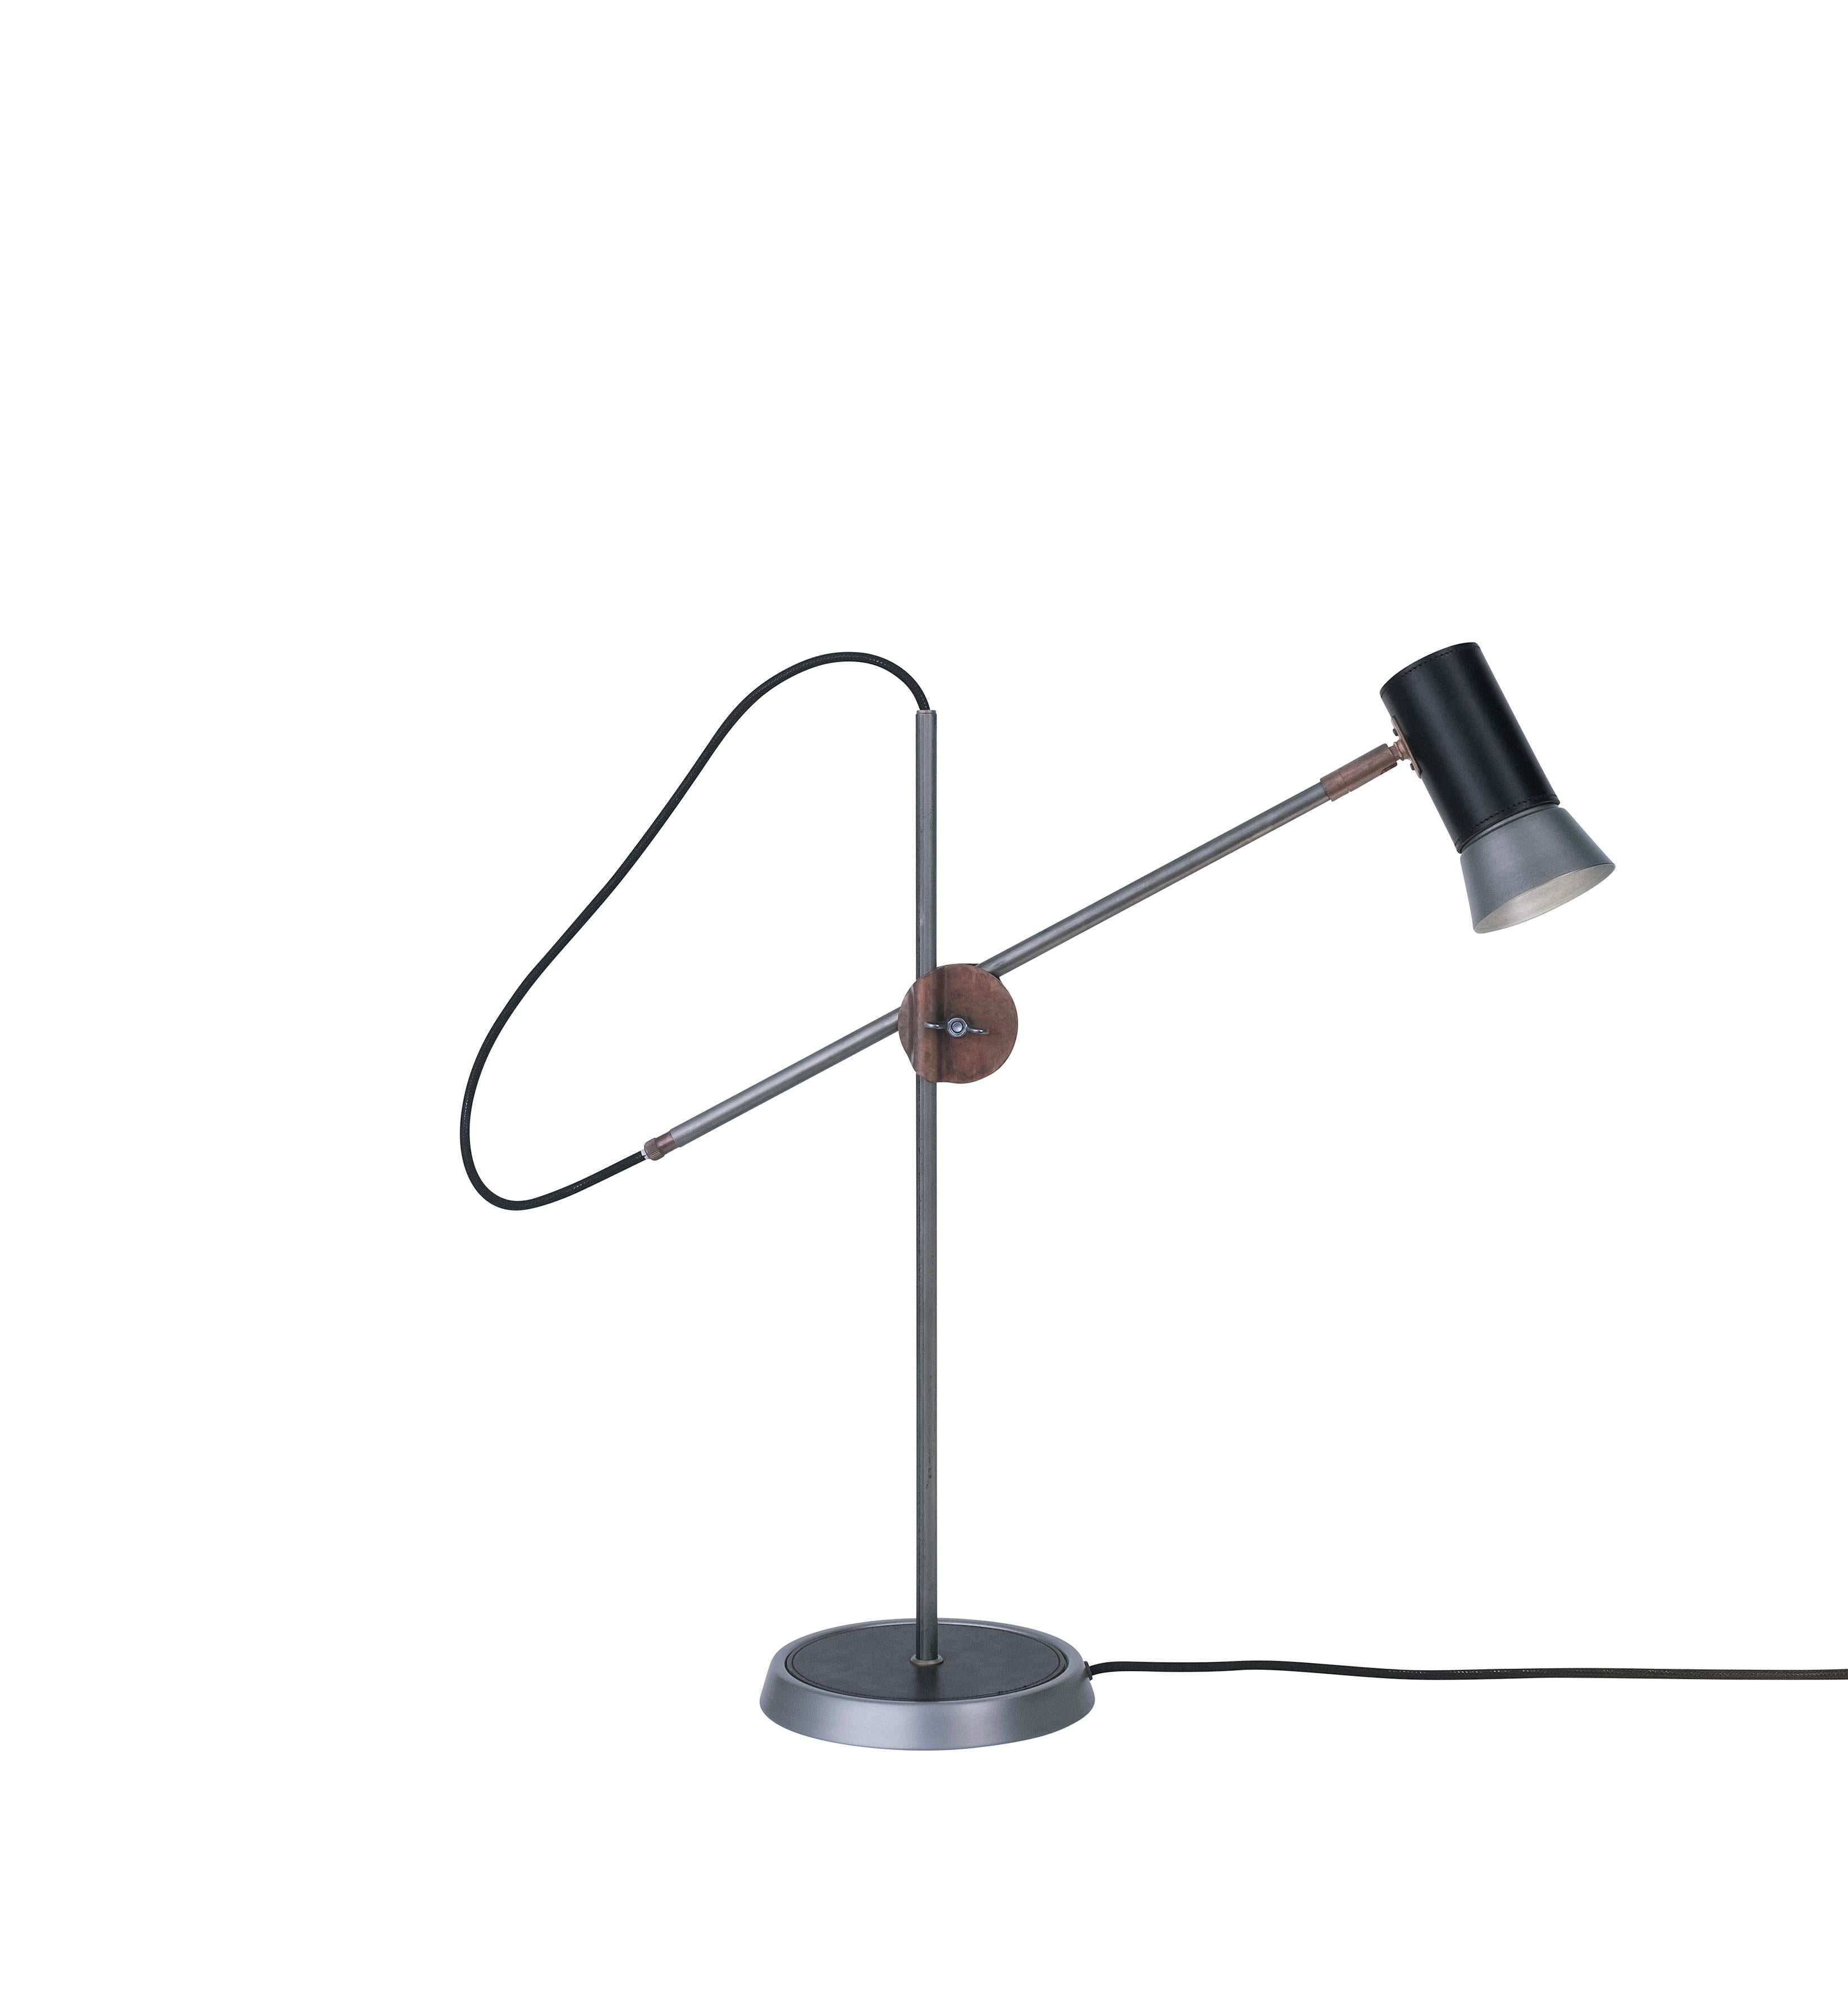 Sabina Grubbeson Kusk Black Table Lamp by Konsthantverk In New Condition For Sale In Barcelona, Barcelona